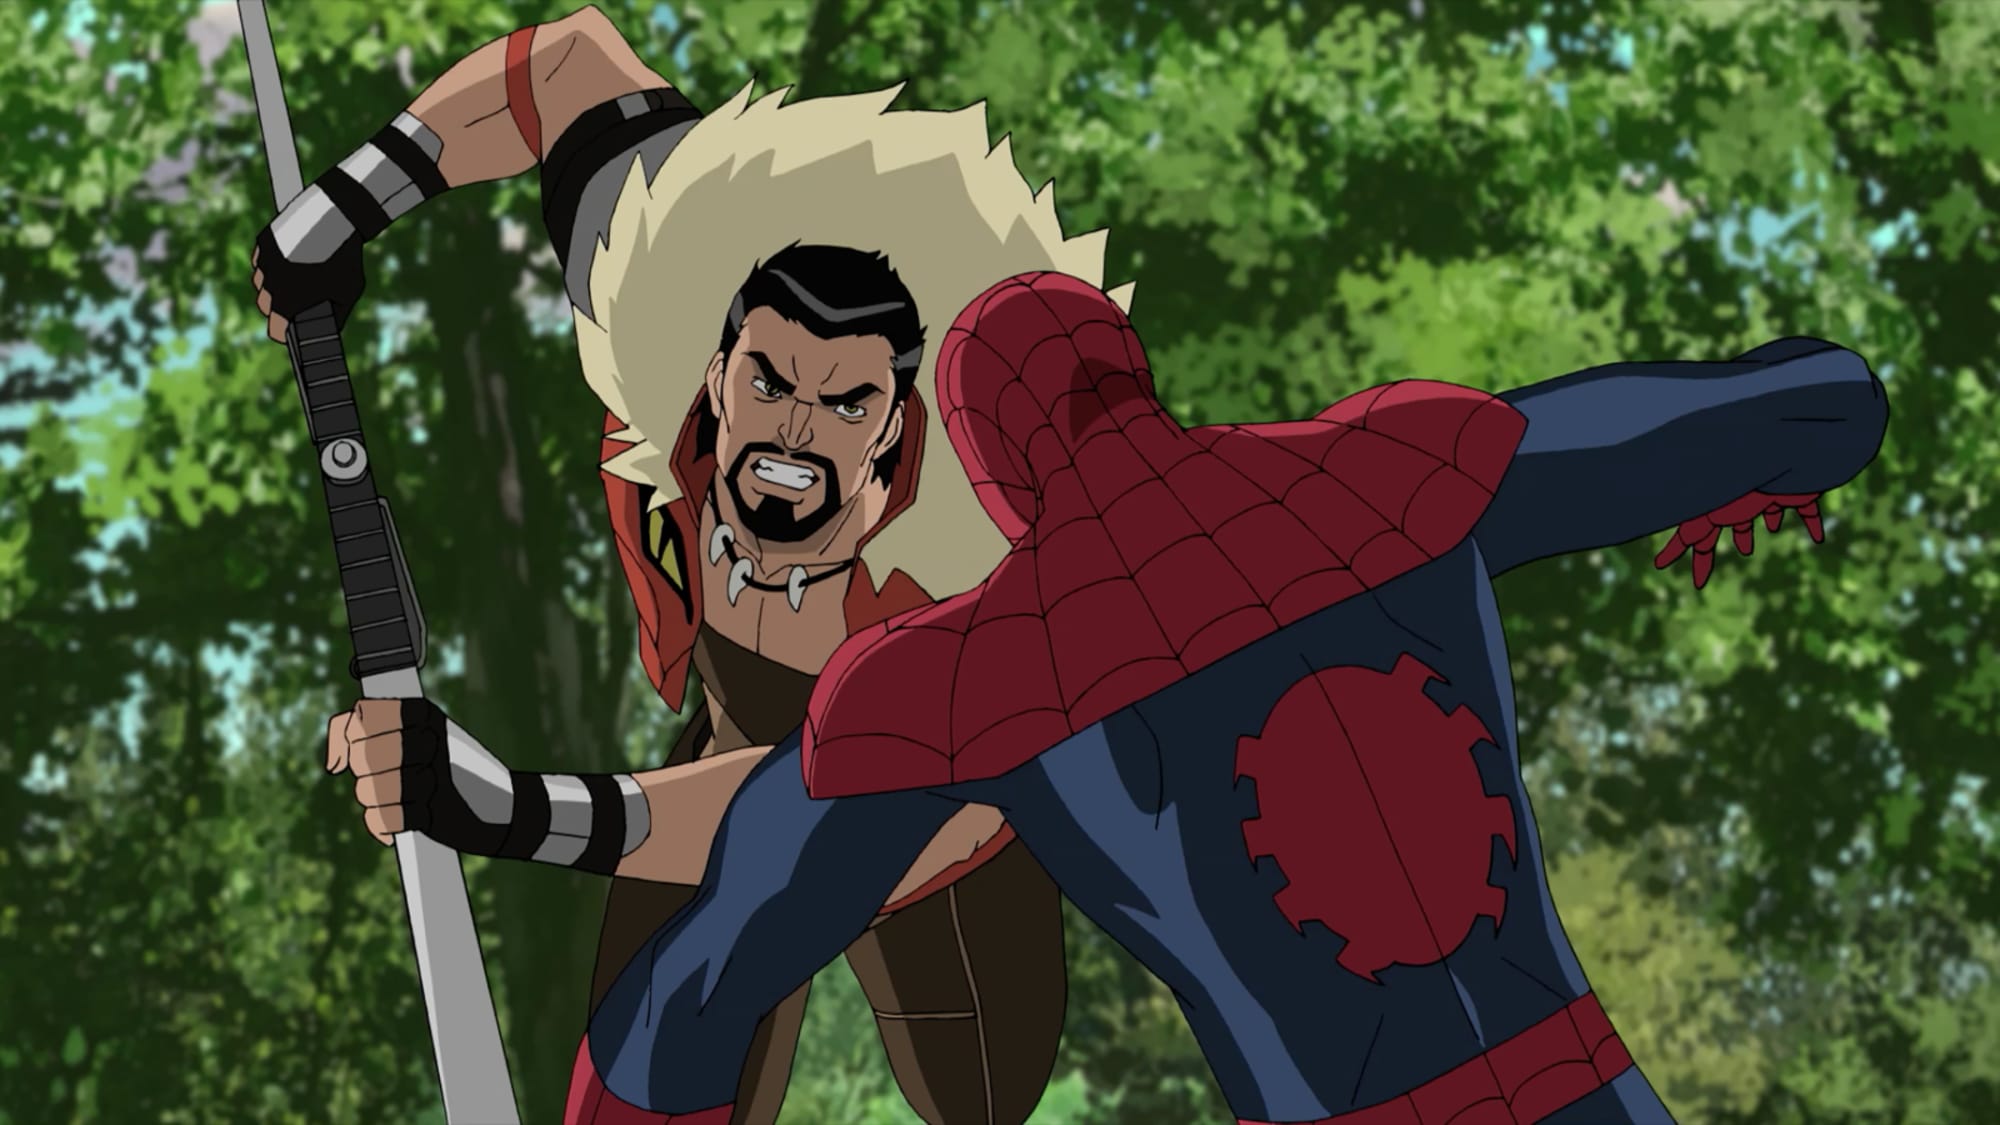 Kraven screenwriter says Spider-Man will be in the movie